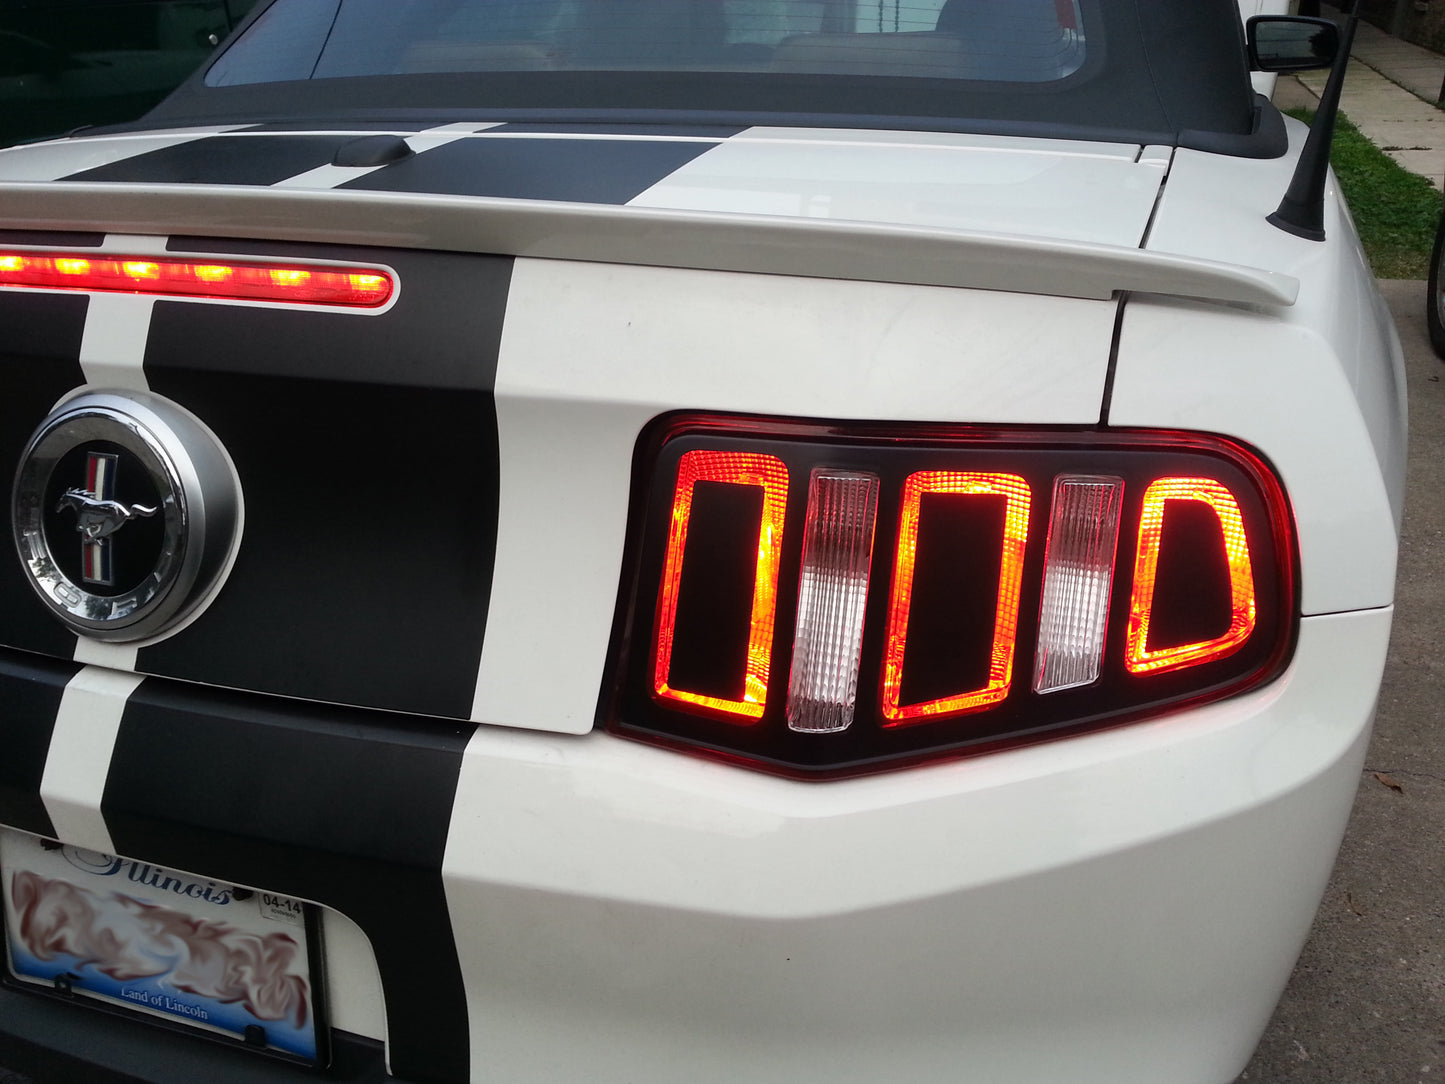 2013 Style Tail Light Conversion Kit (2010-2012 Mustang)